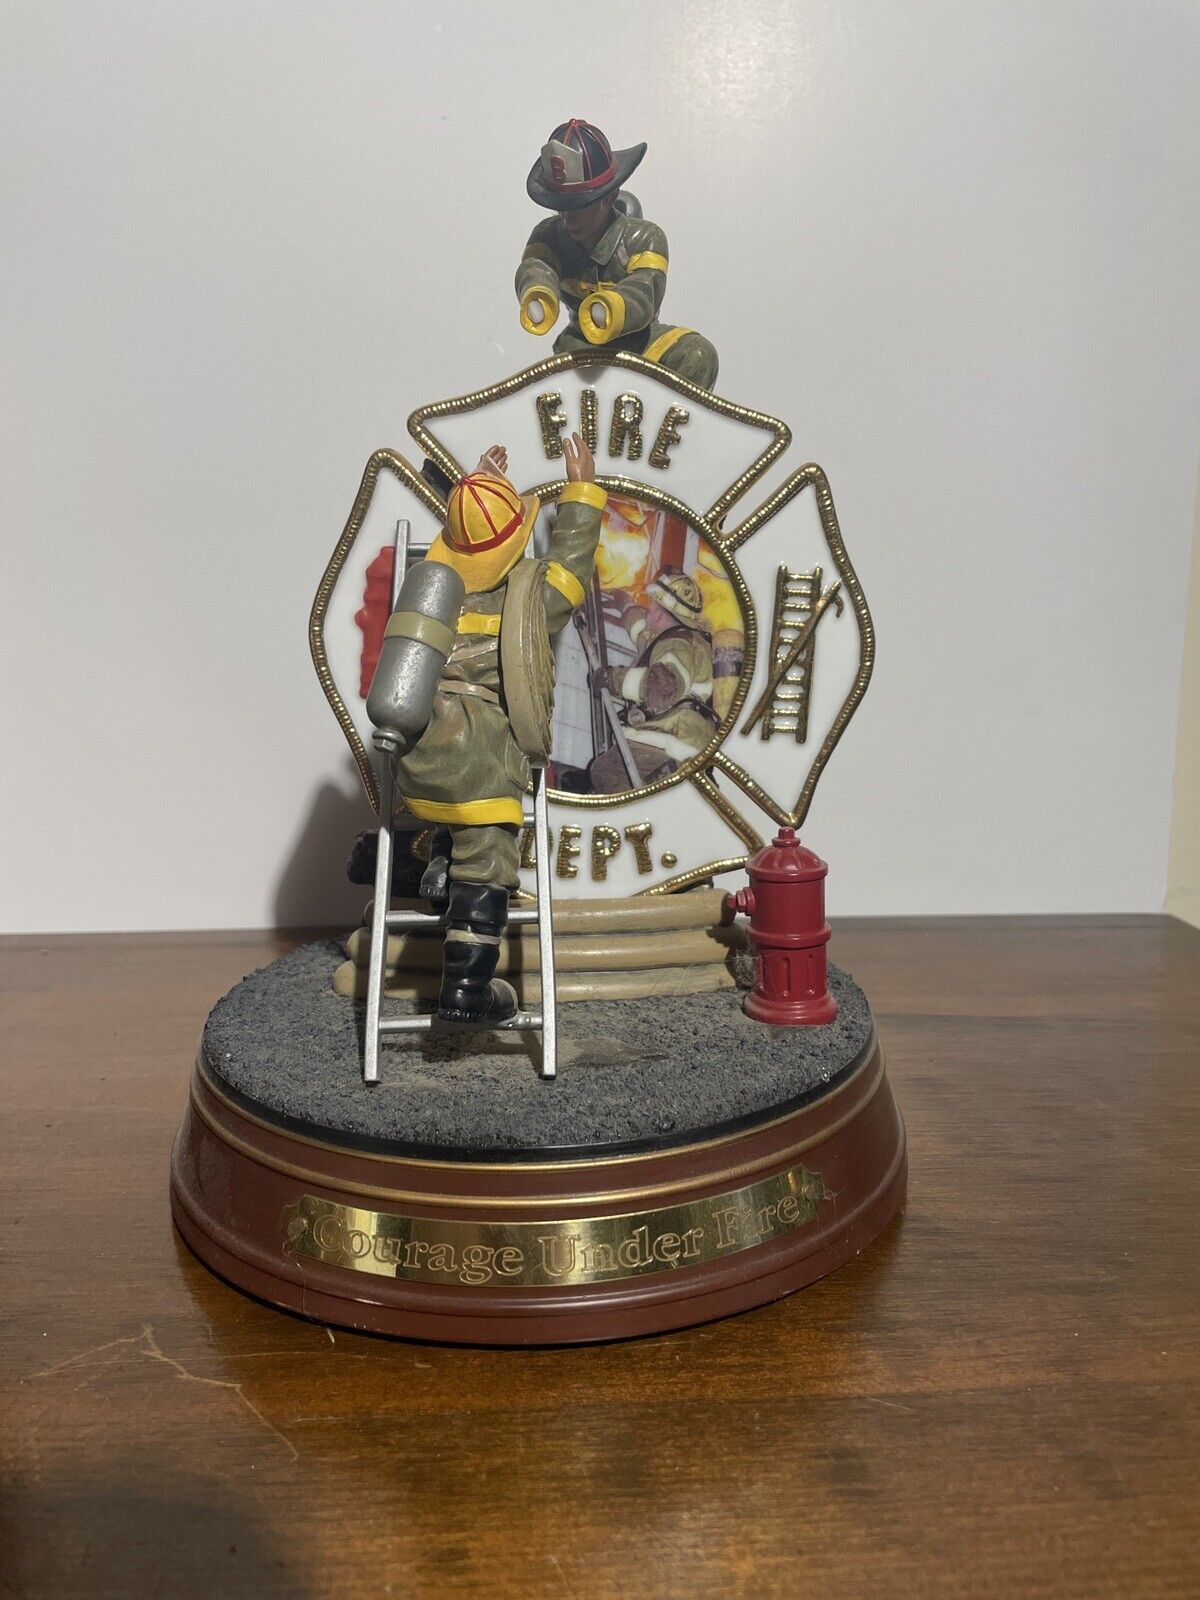 The Bradford Exchange Courage Under Fire Limited Edition Sculpture Missing Hands